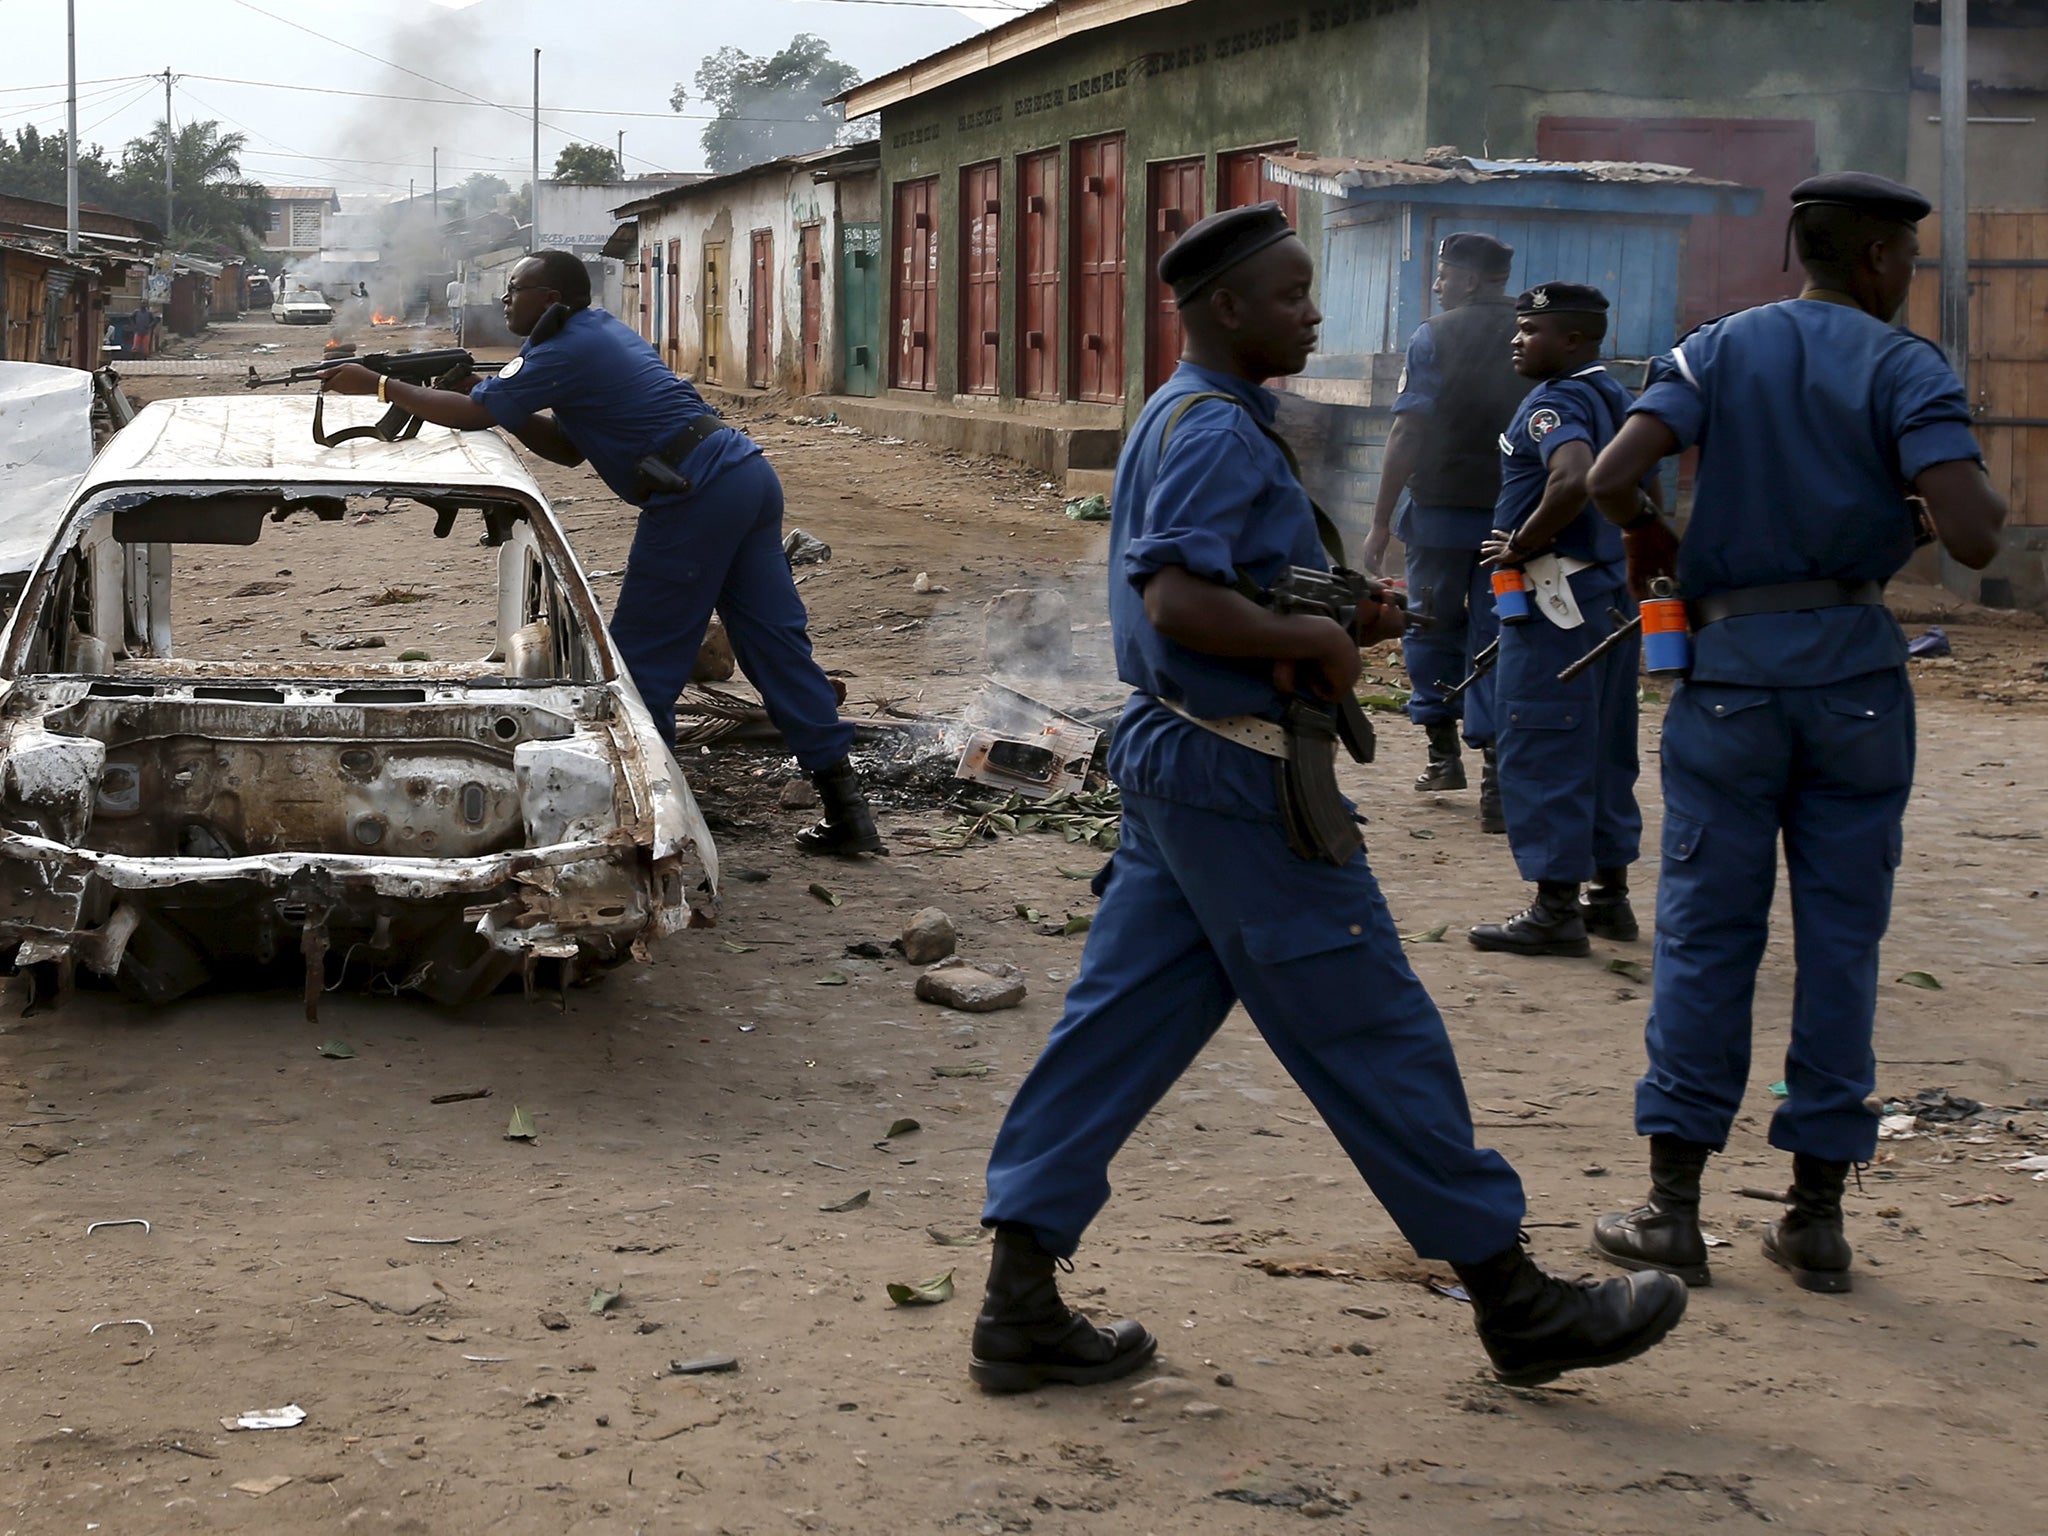 Police point a rifle at protesters who erected a barricade in protest against Pierre Nkurunziza